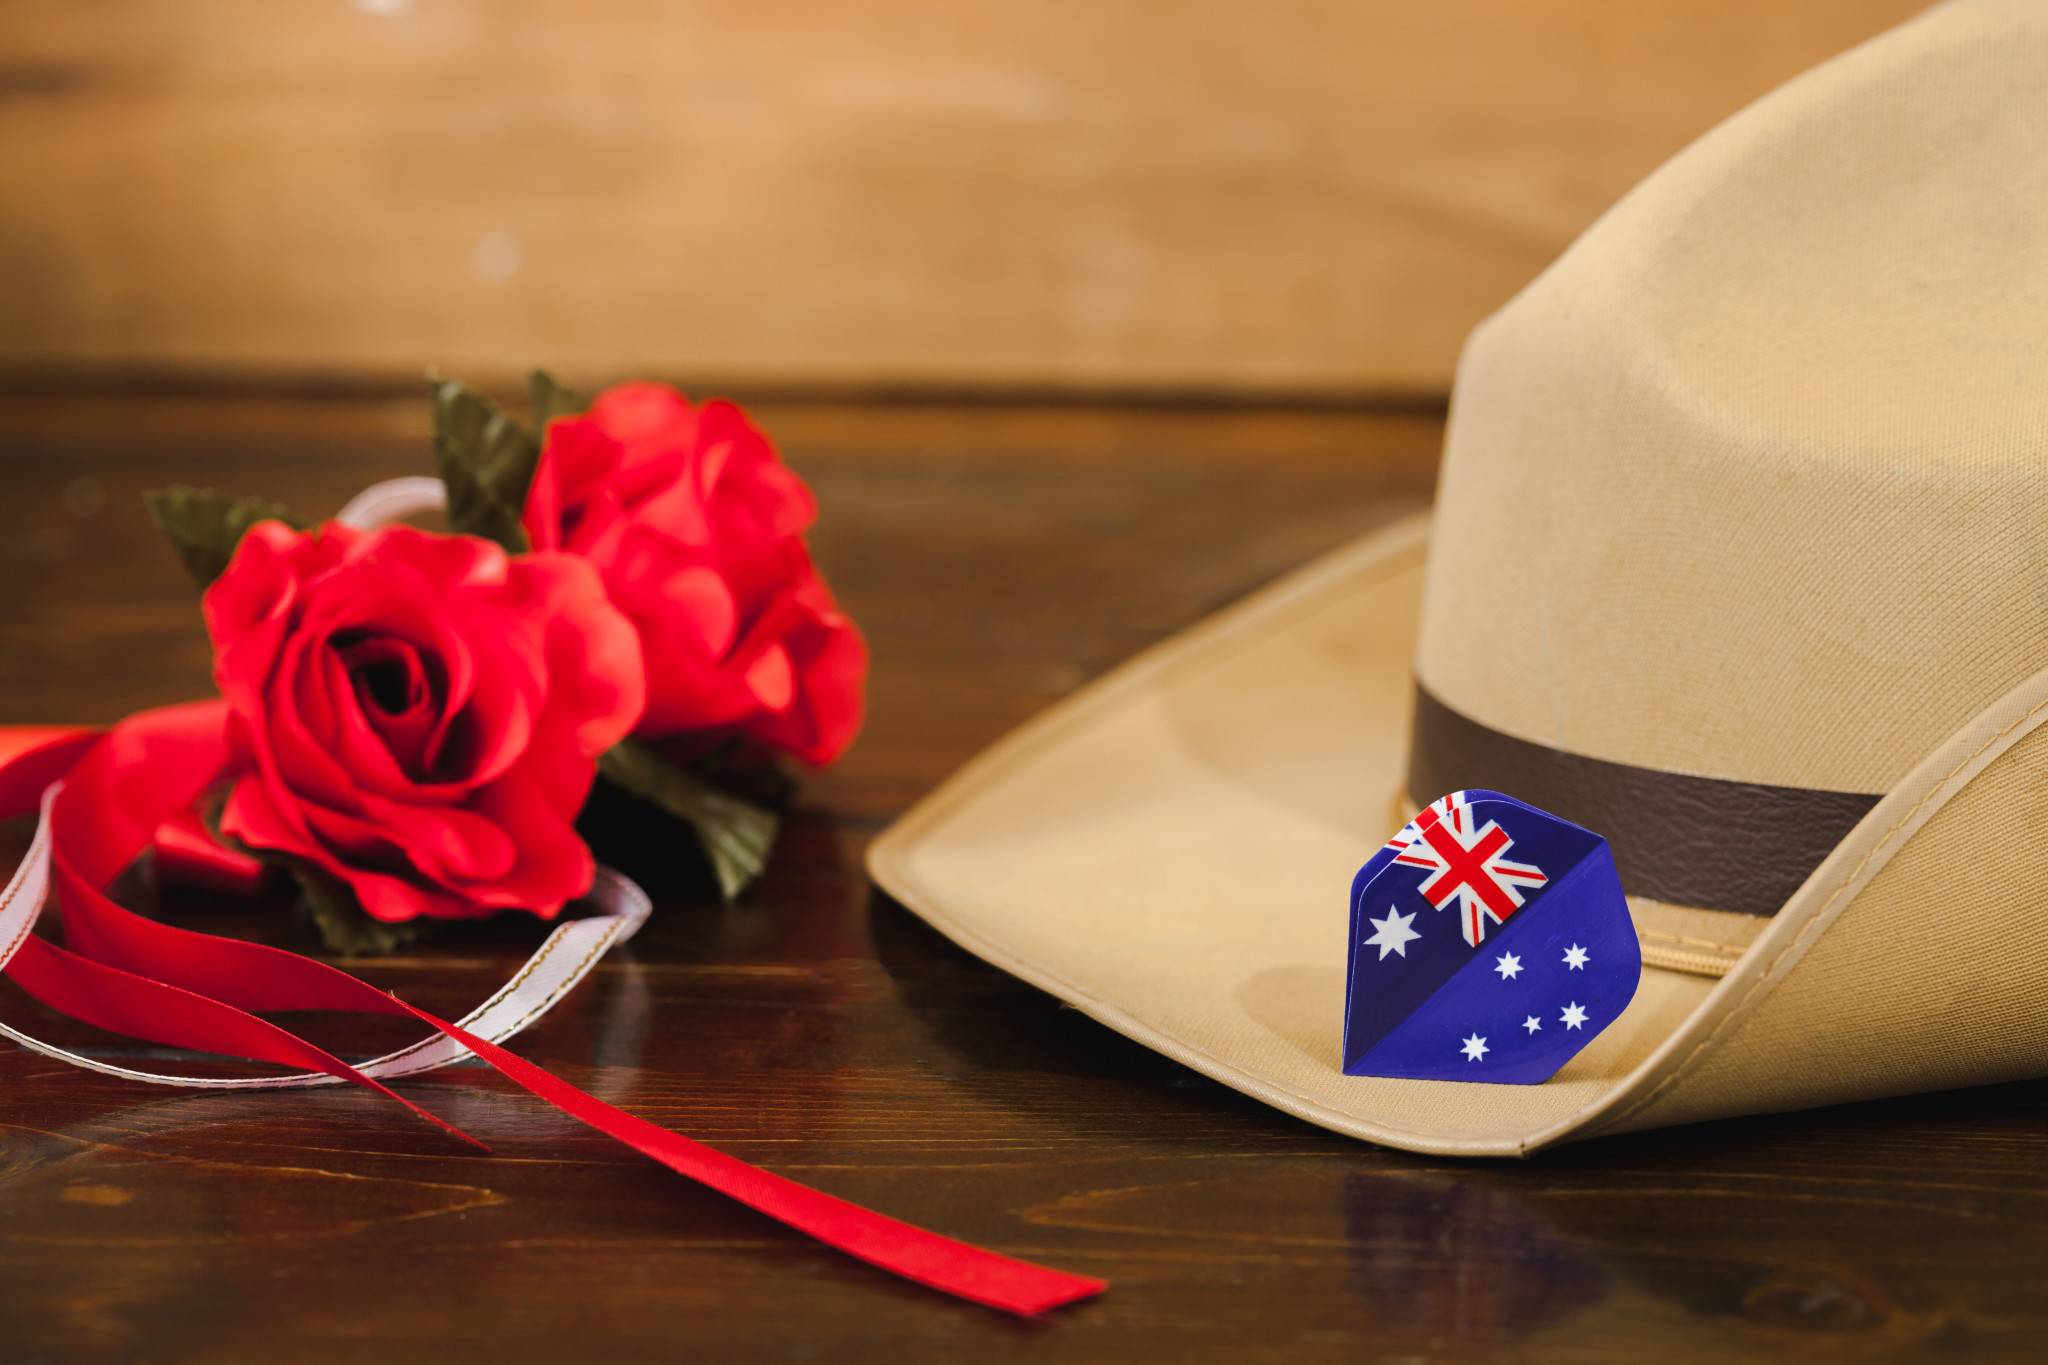 Residents to prepare for Anzac - feature photo